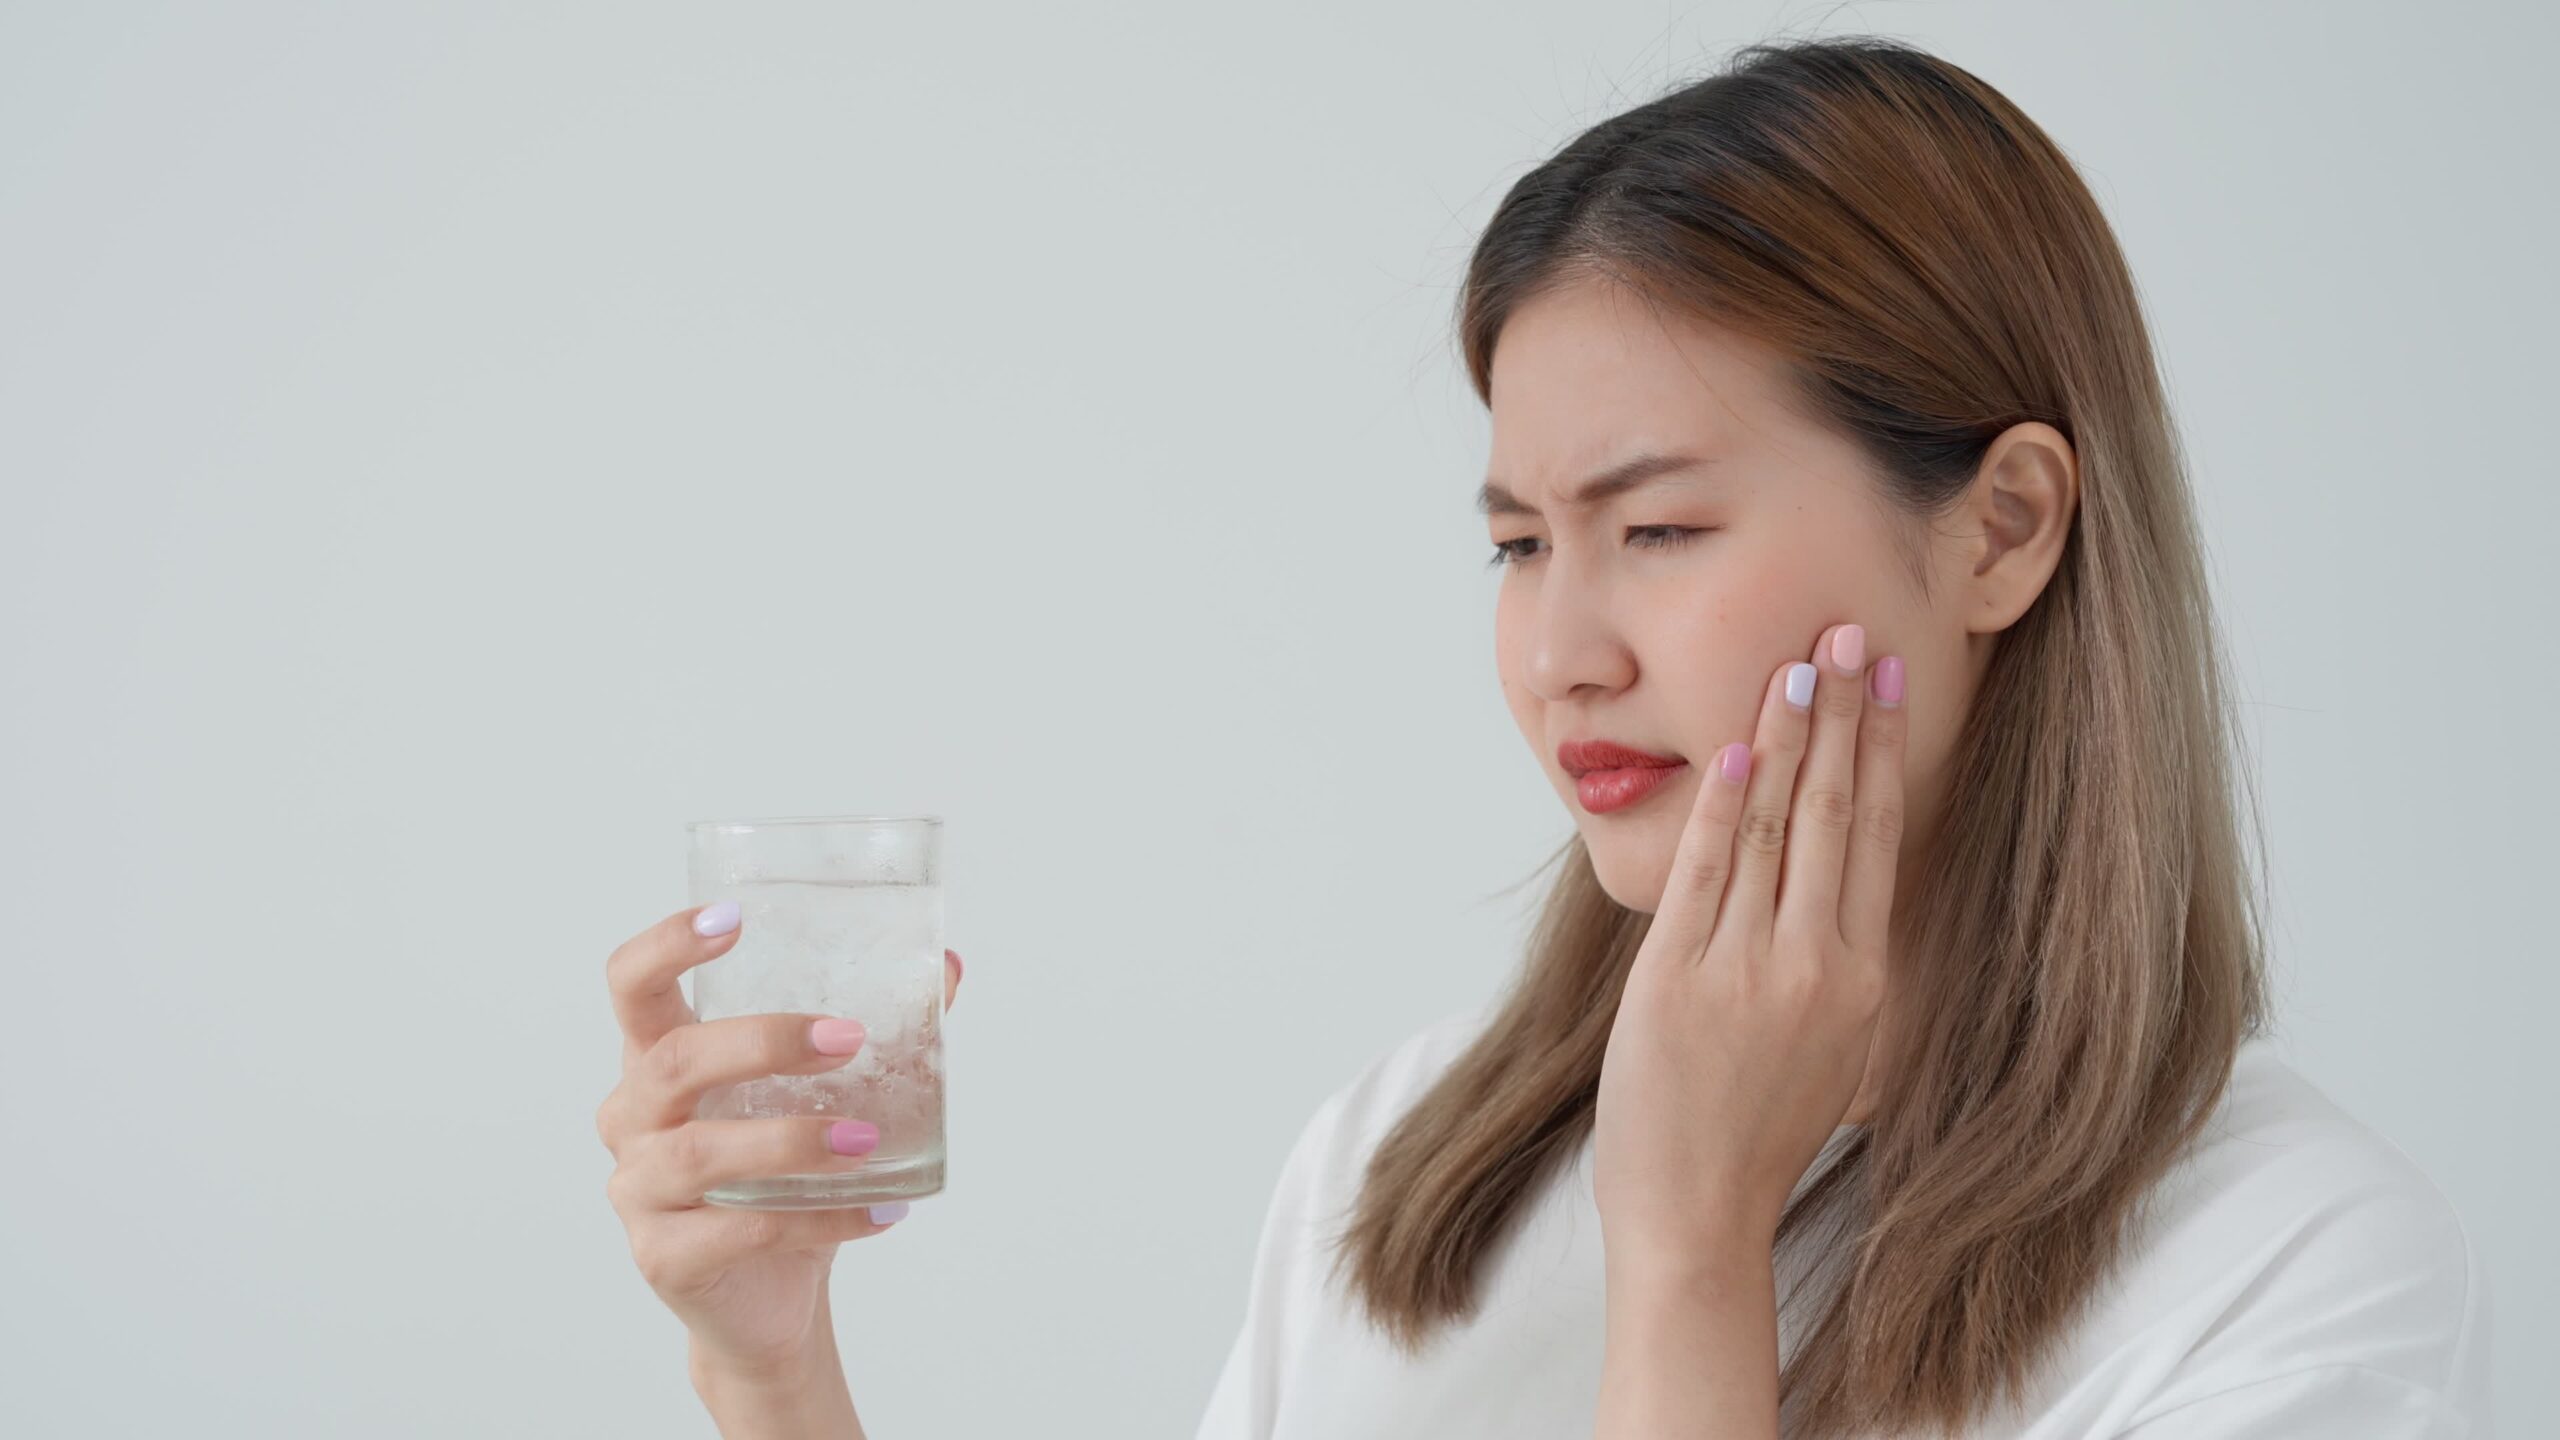 Can You Drink Cold Water After Tooth Extraction?